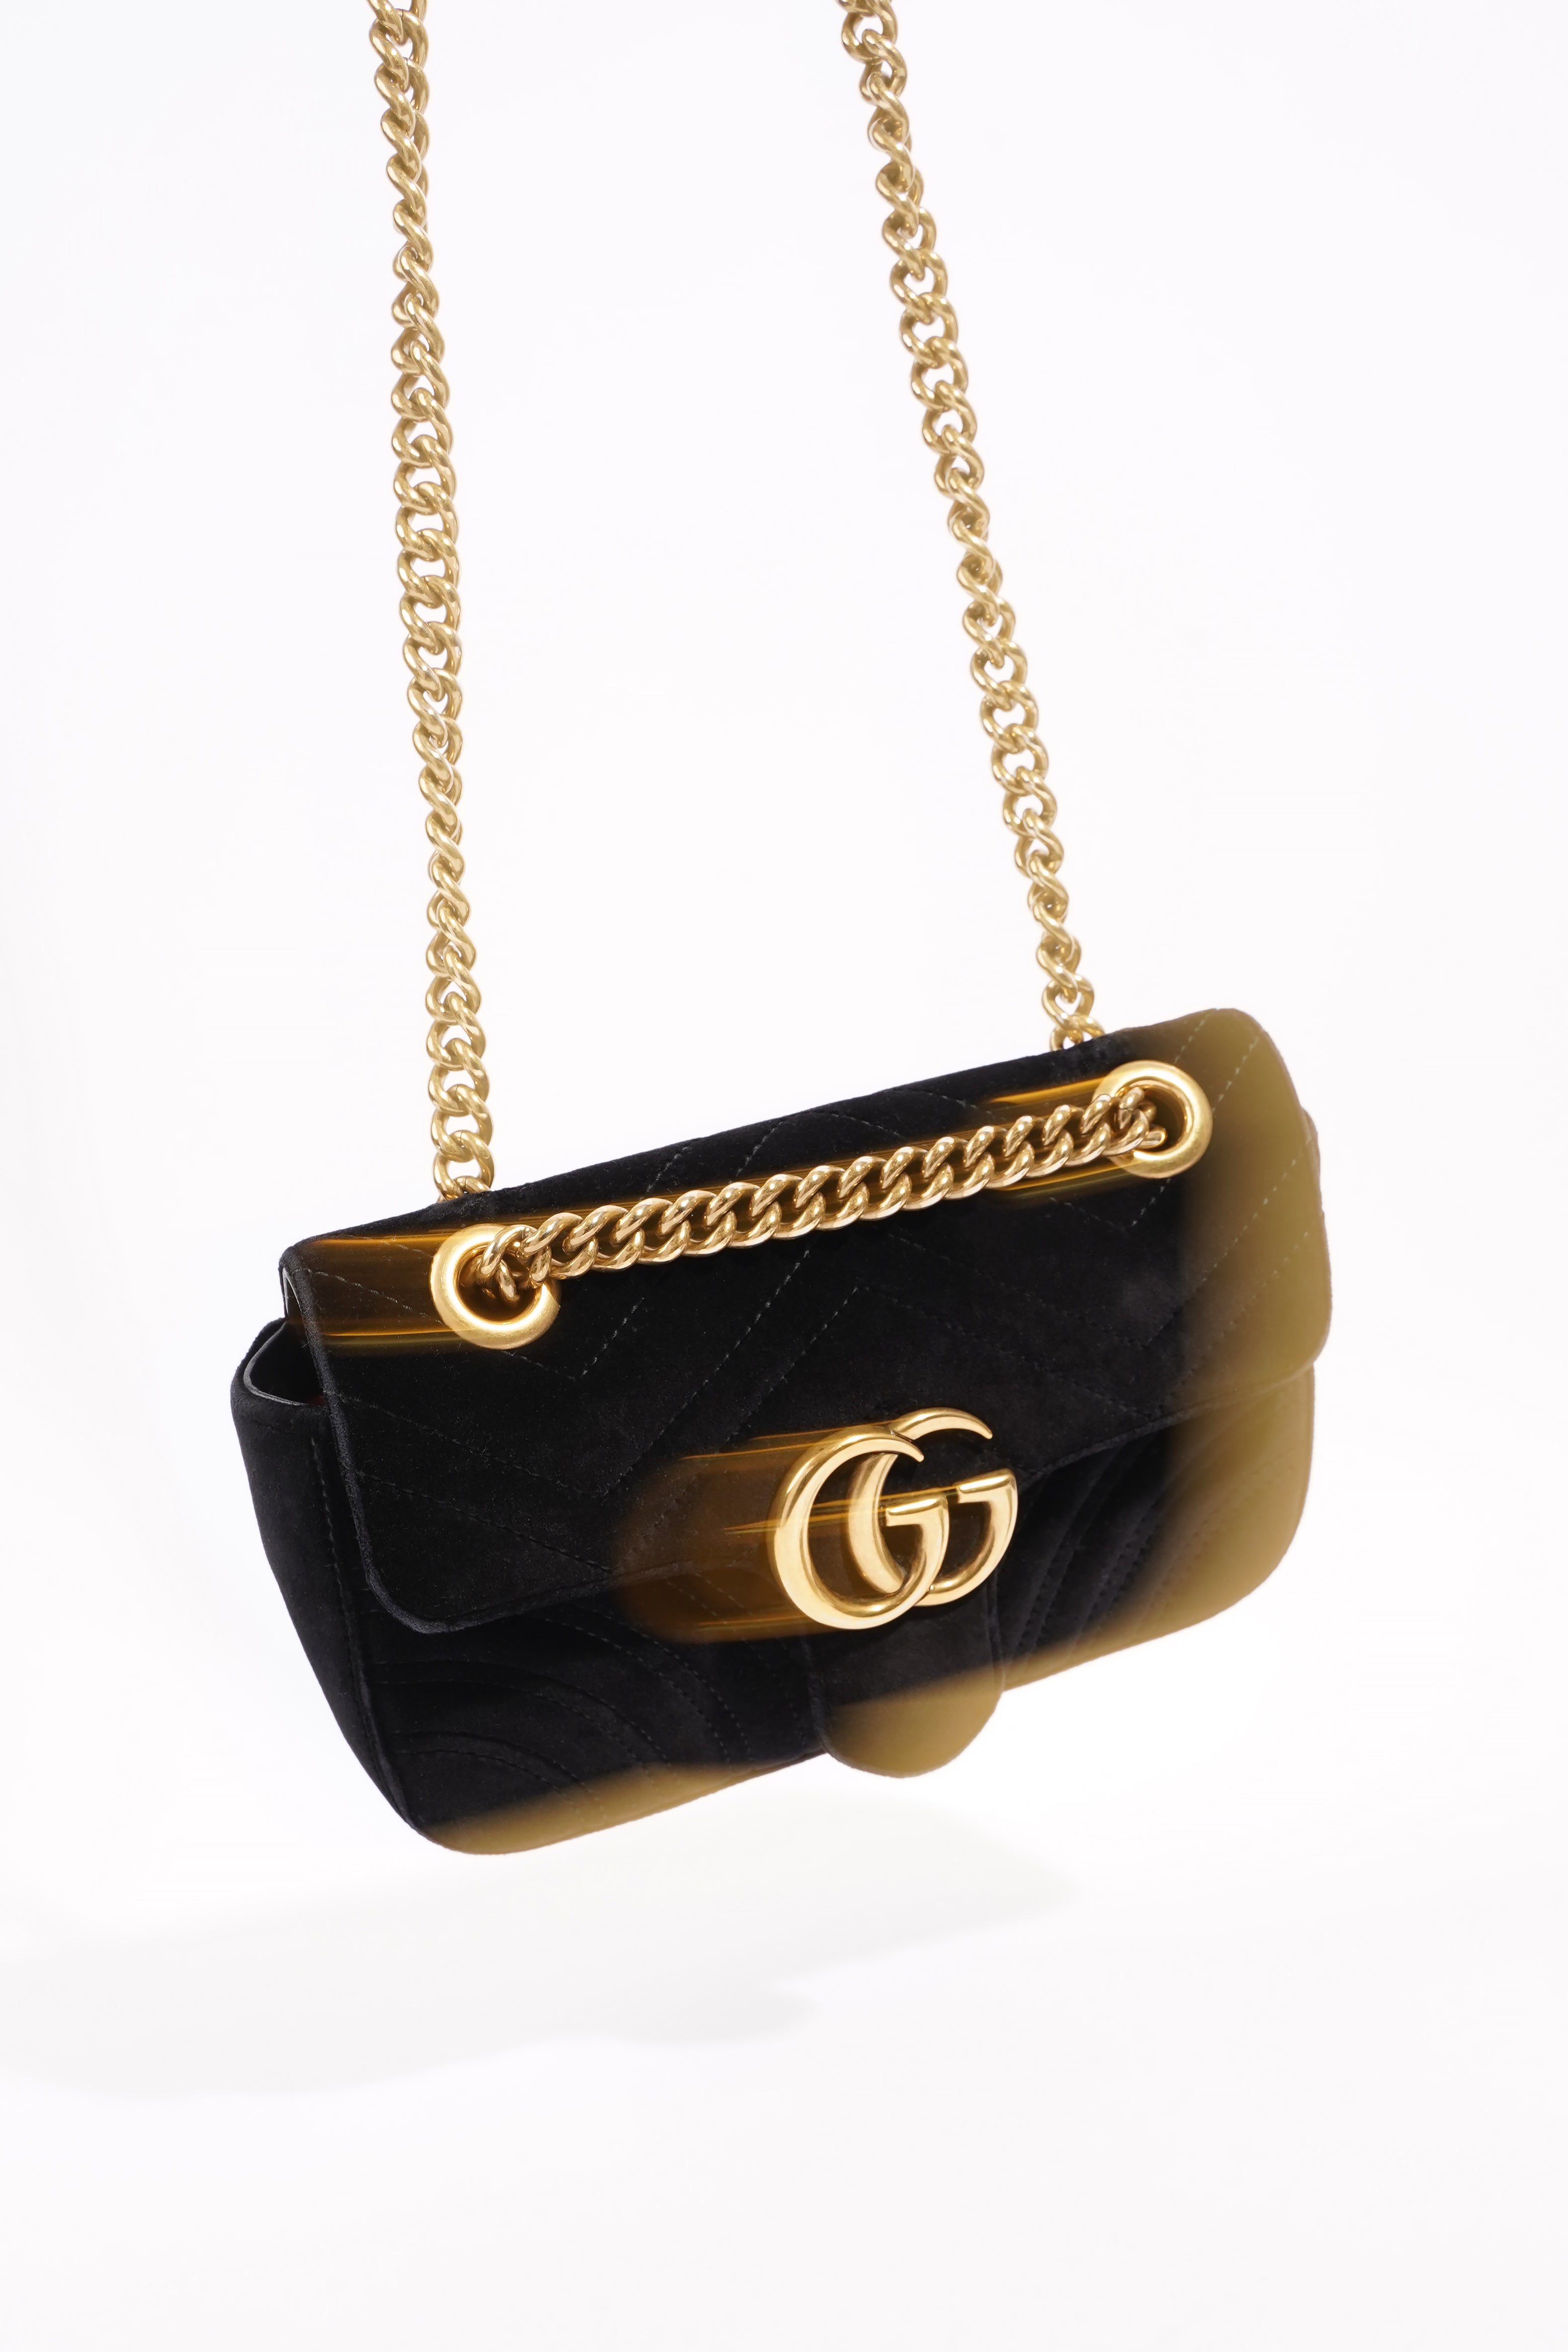 Practical tips for Using Gucci Marmont Matelasse Bag